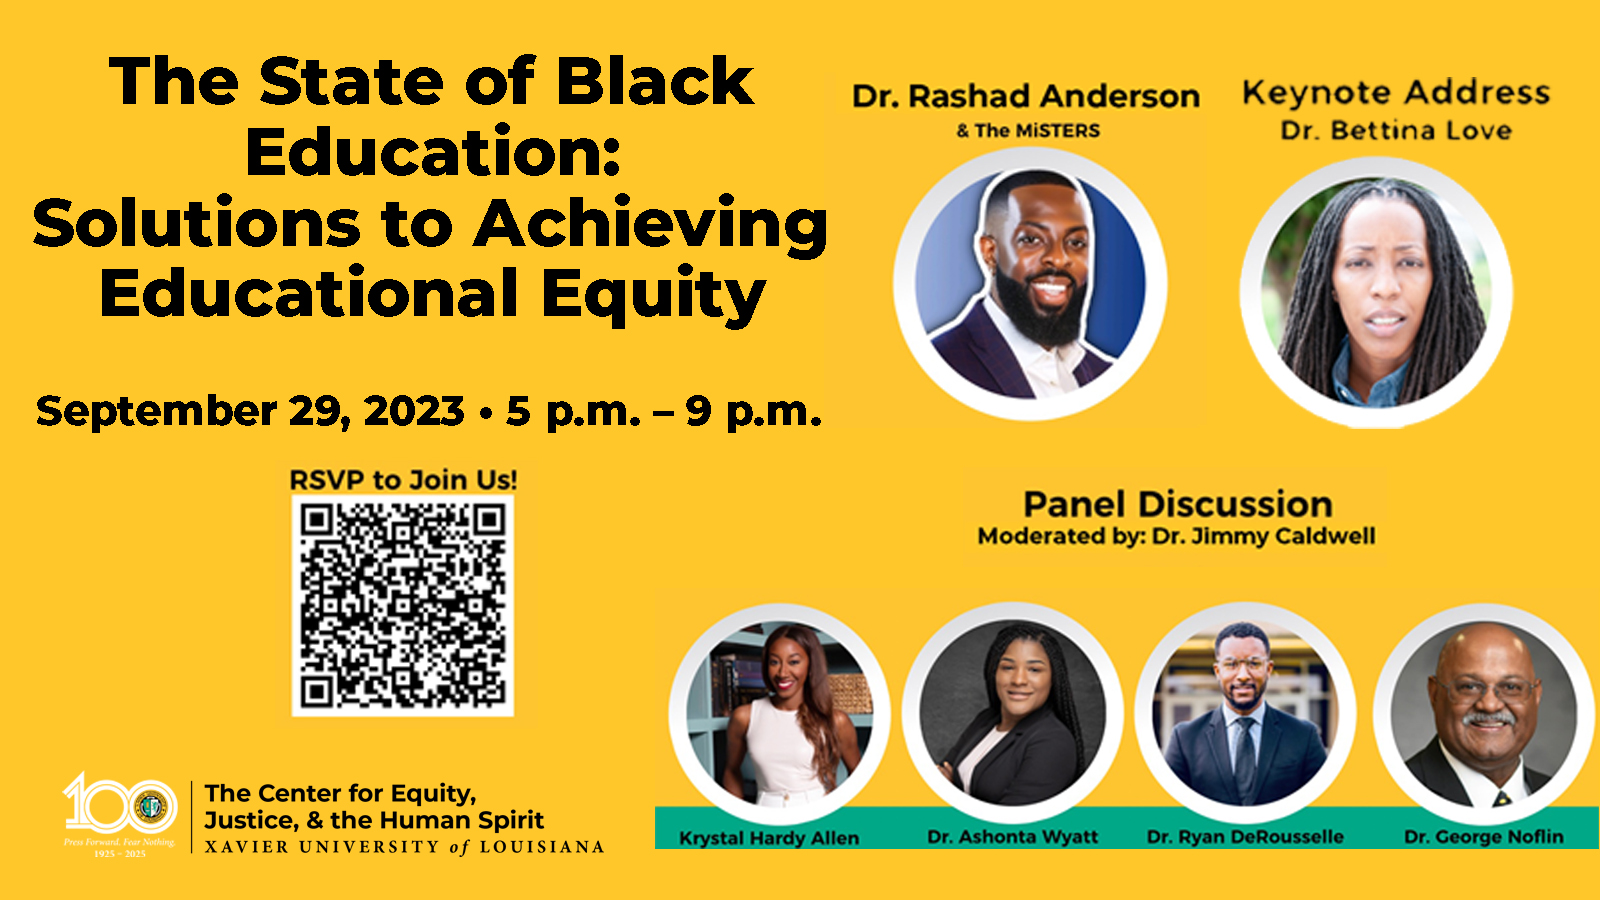 Xavier University of Louisiana Hosts Educational Equity Summit in support of Higher-Quality Education for Black students